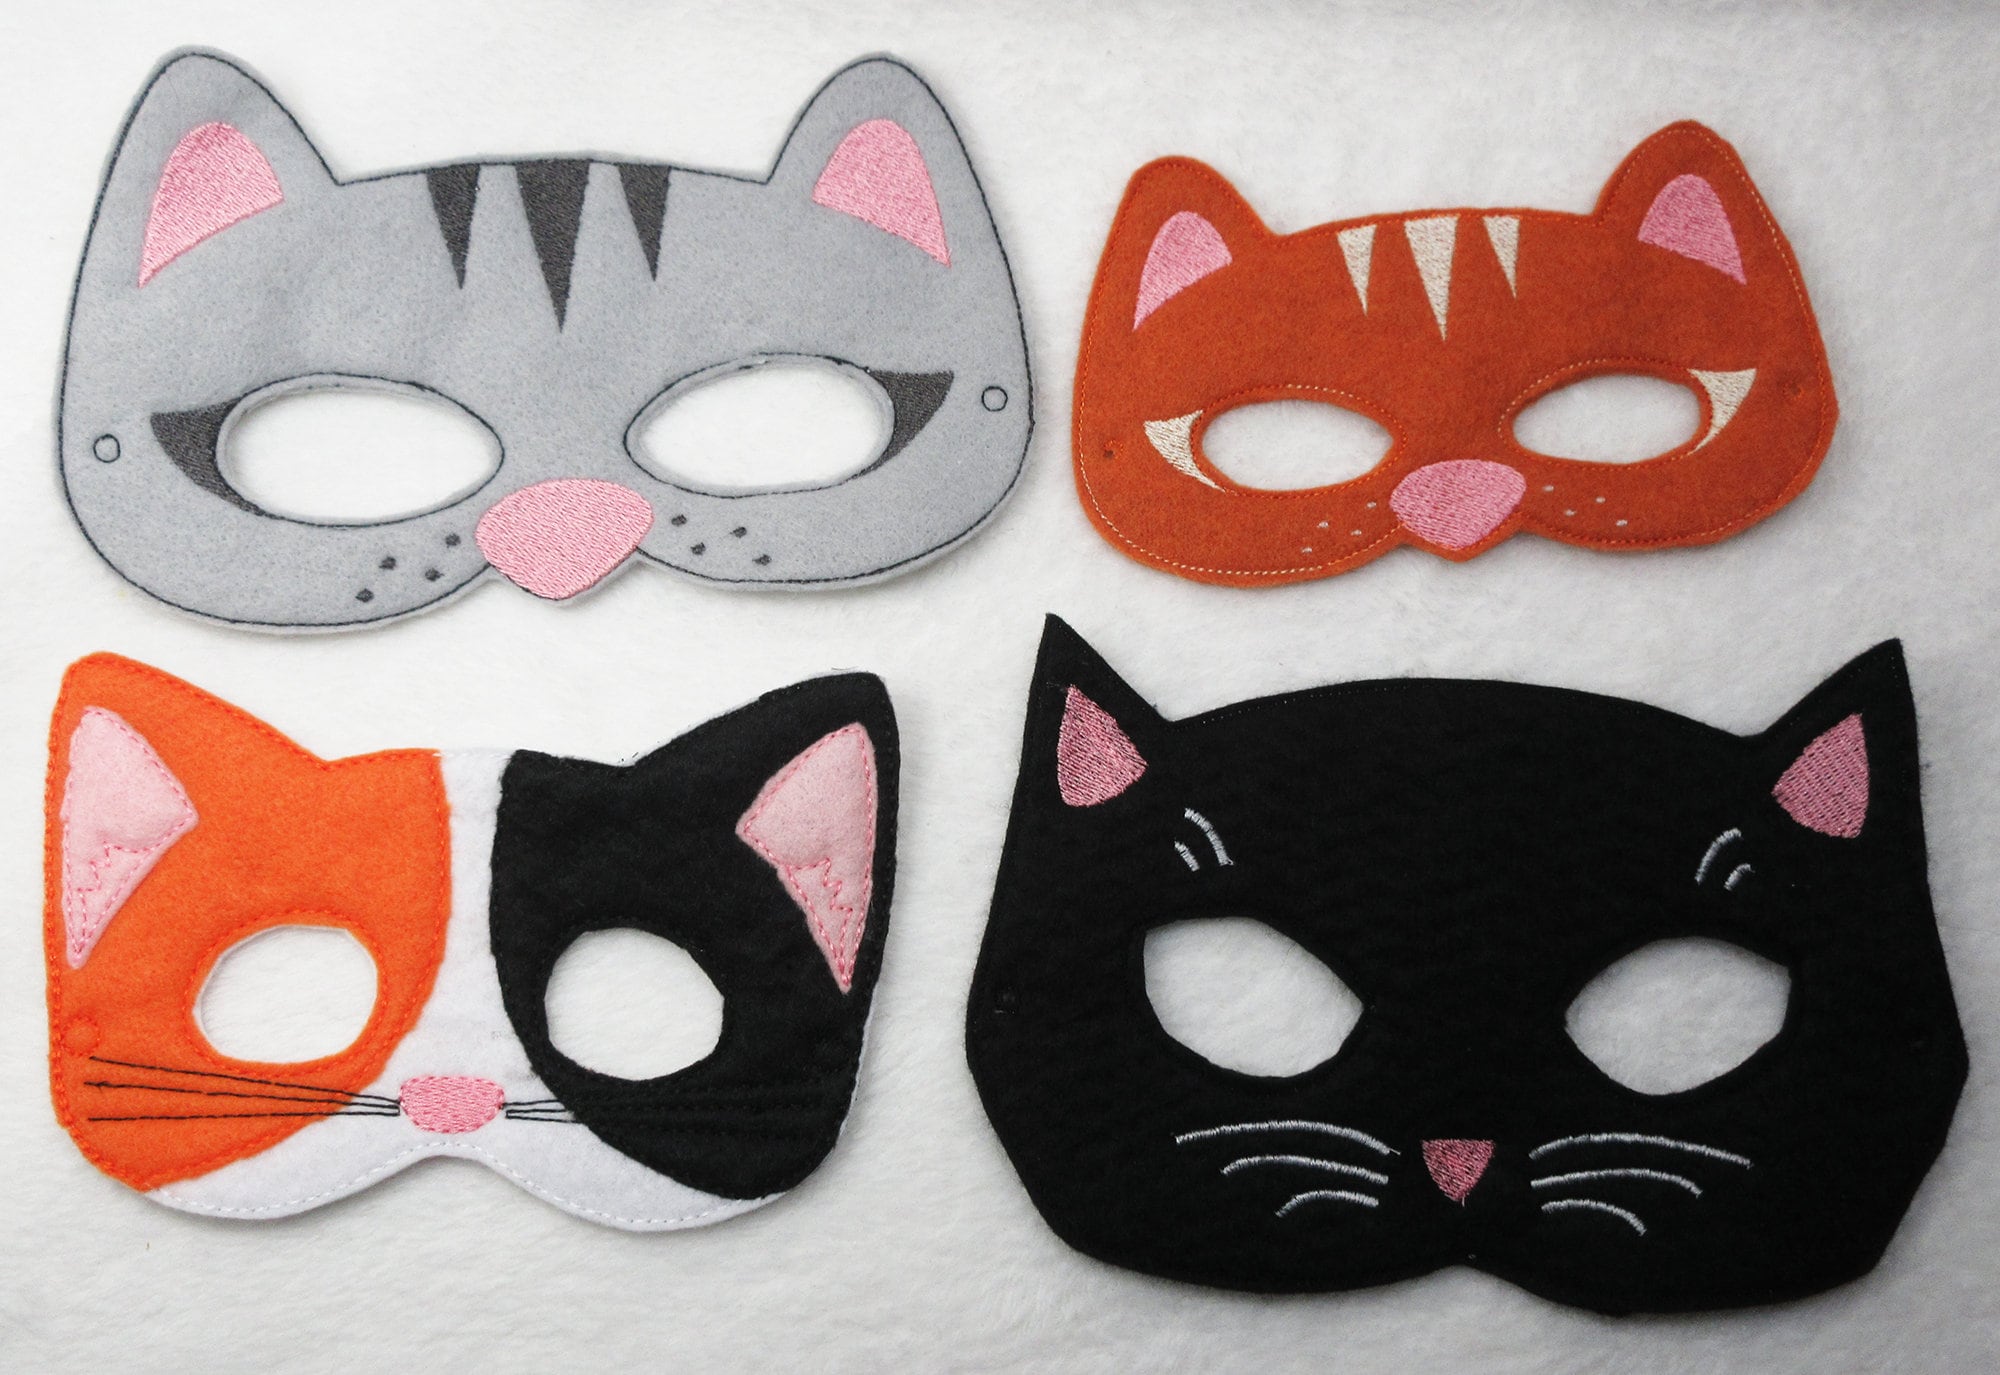 Cat Masks with Tattoos Black Cat - Halloween FX Props